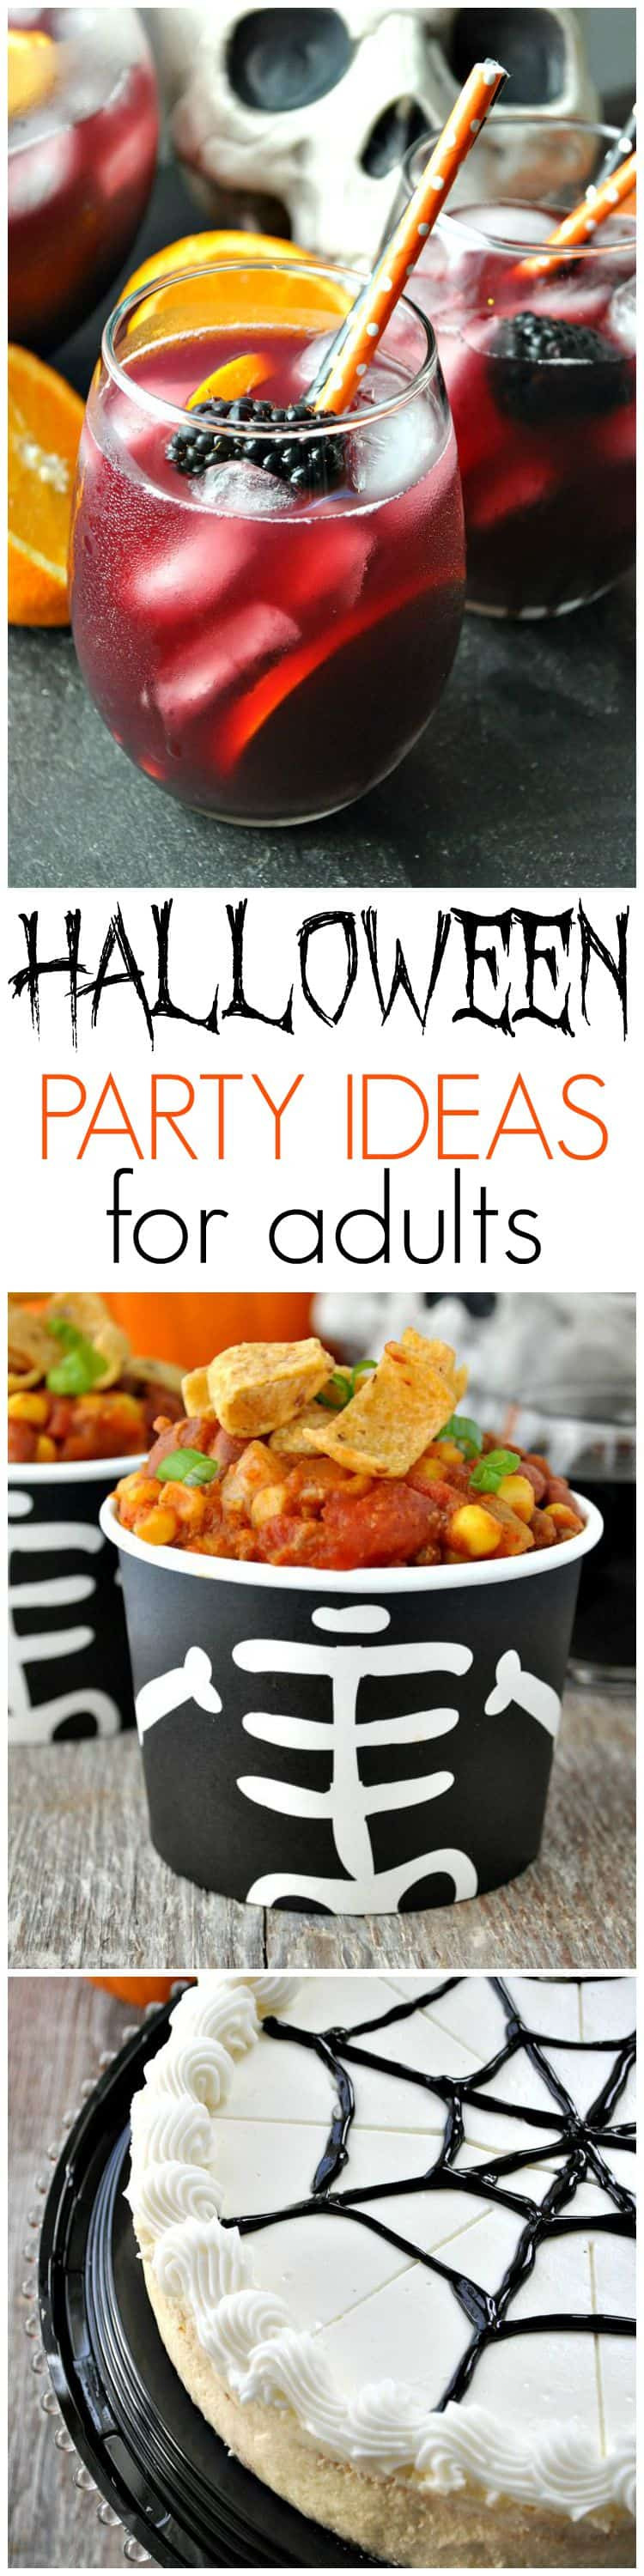 Ideas For Halloween Party For Adults
 Slow Cooker Pumpkin Chili Halloween Party Ideas for